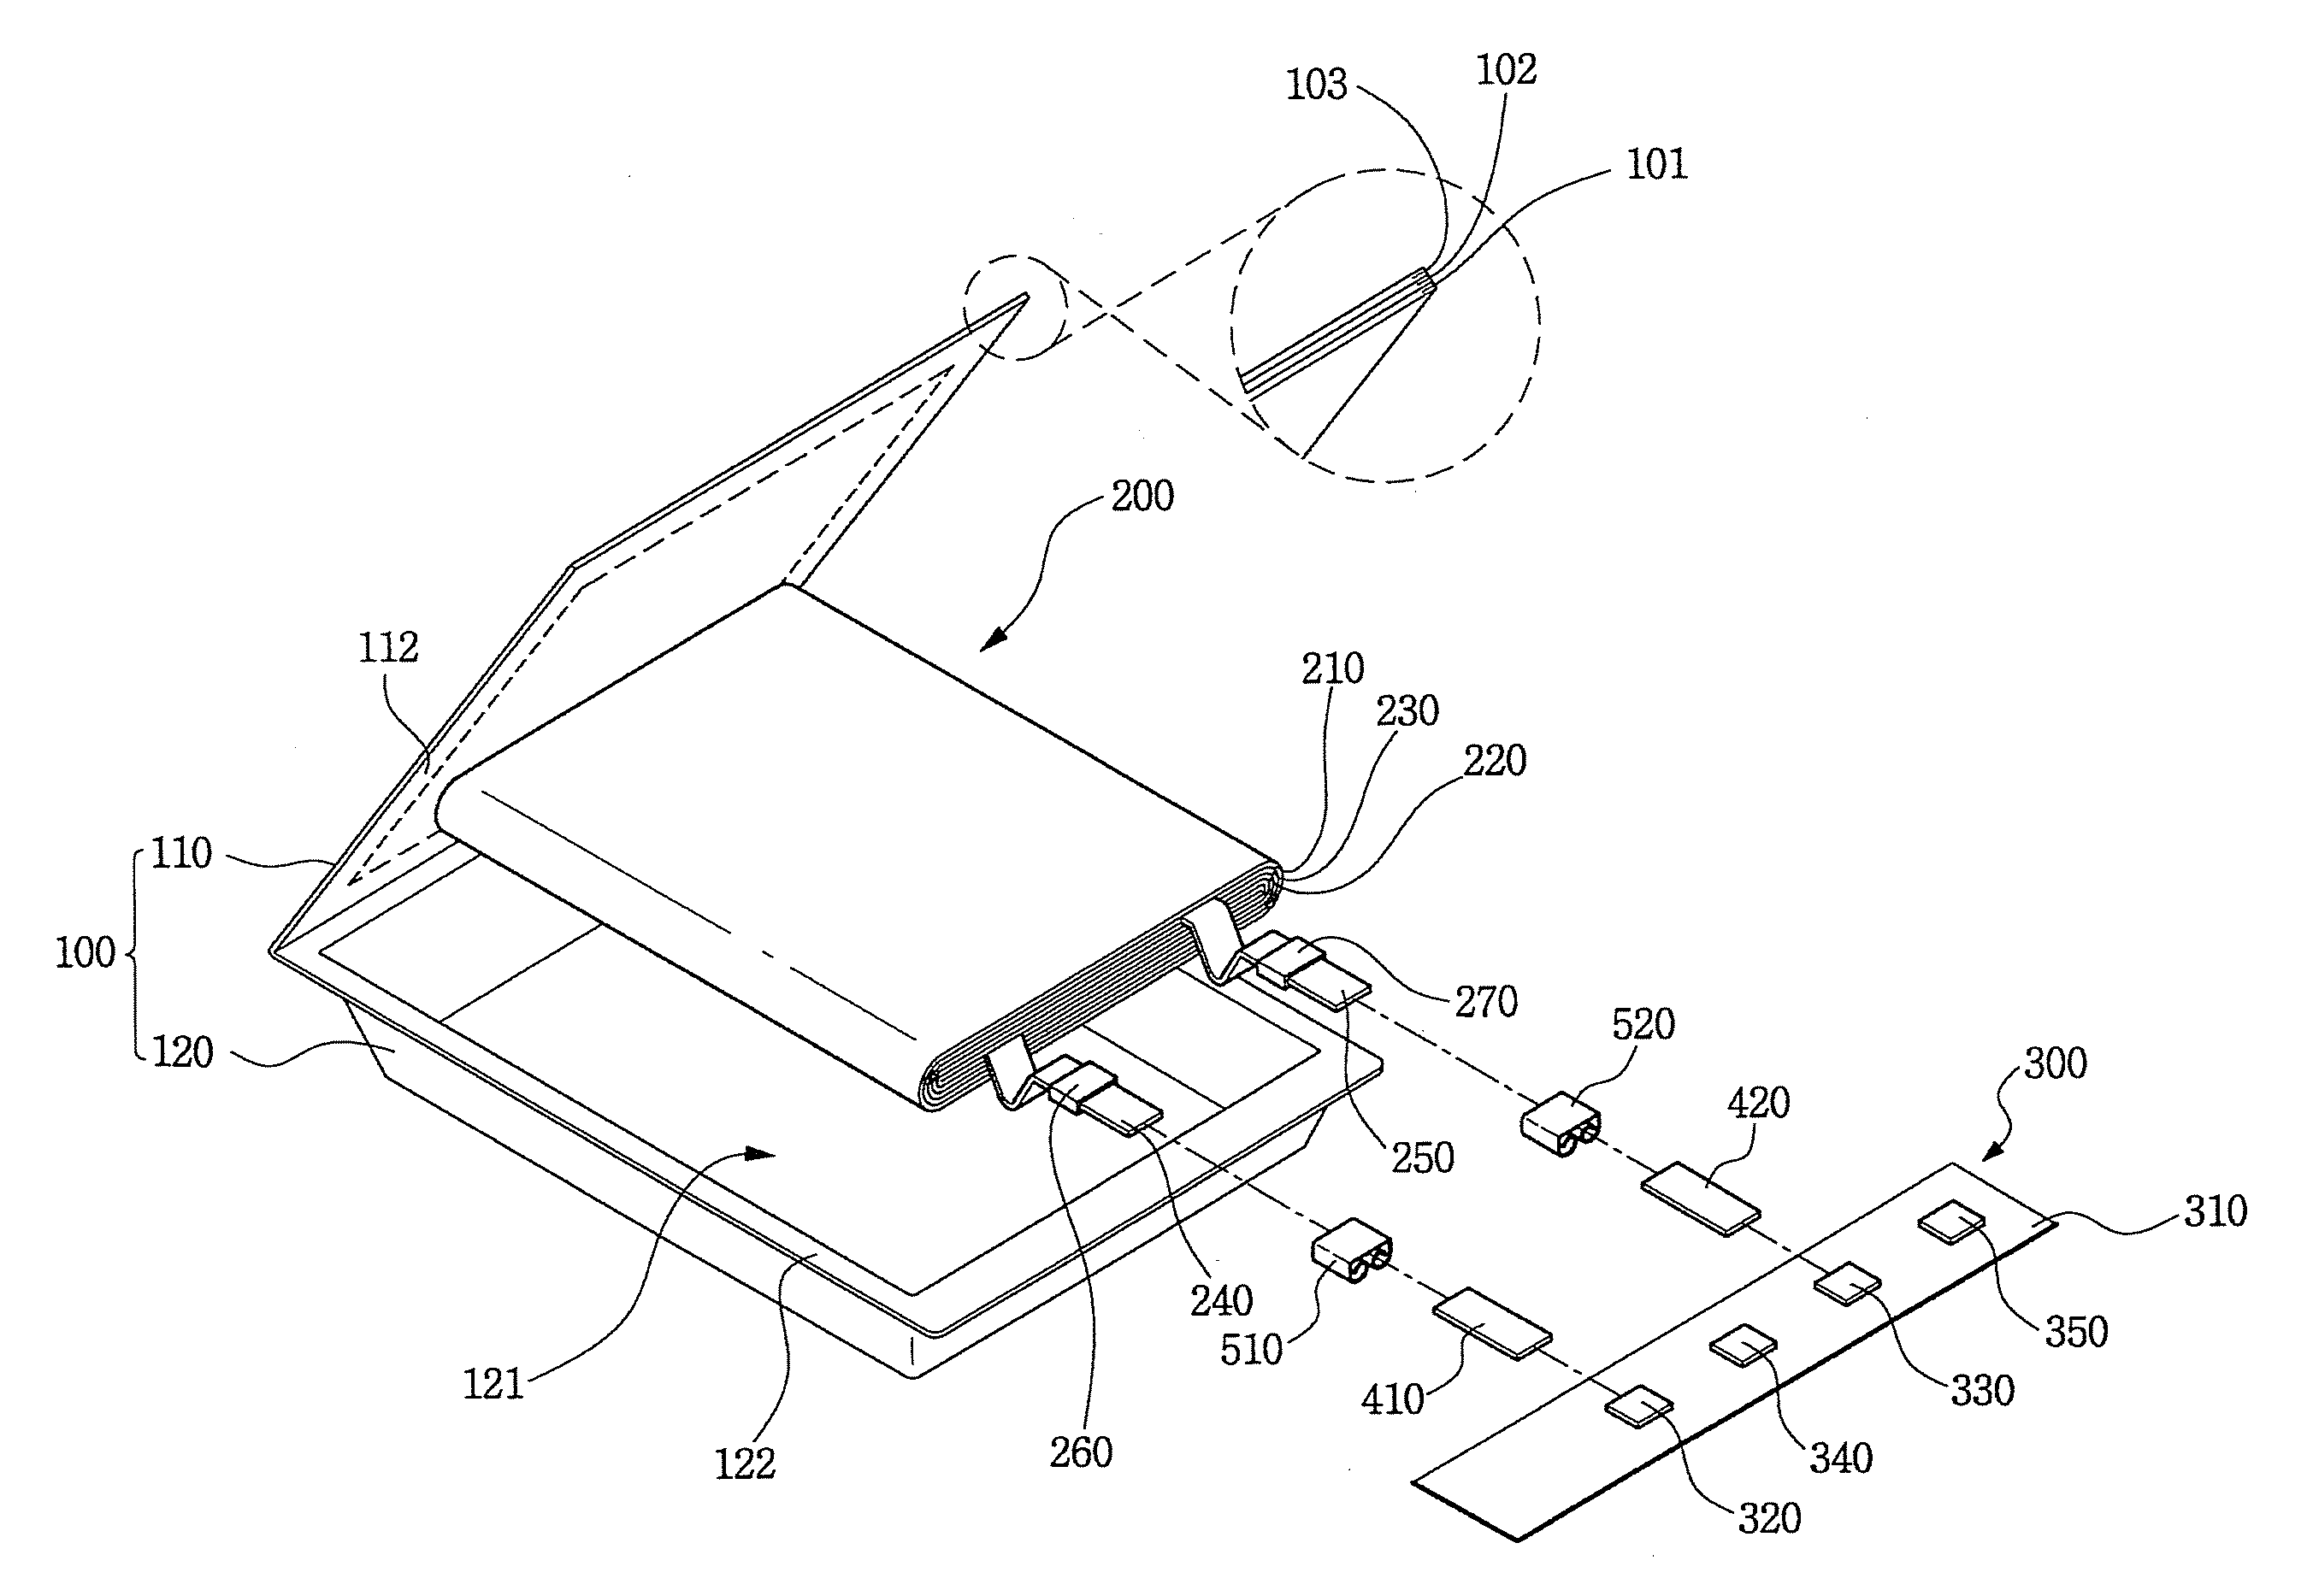 Squeeze pin and secondary battery using the same